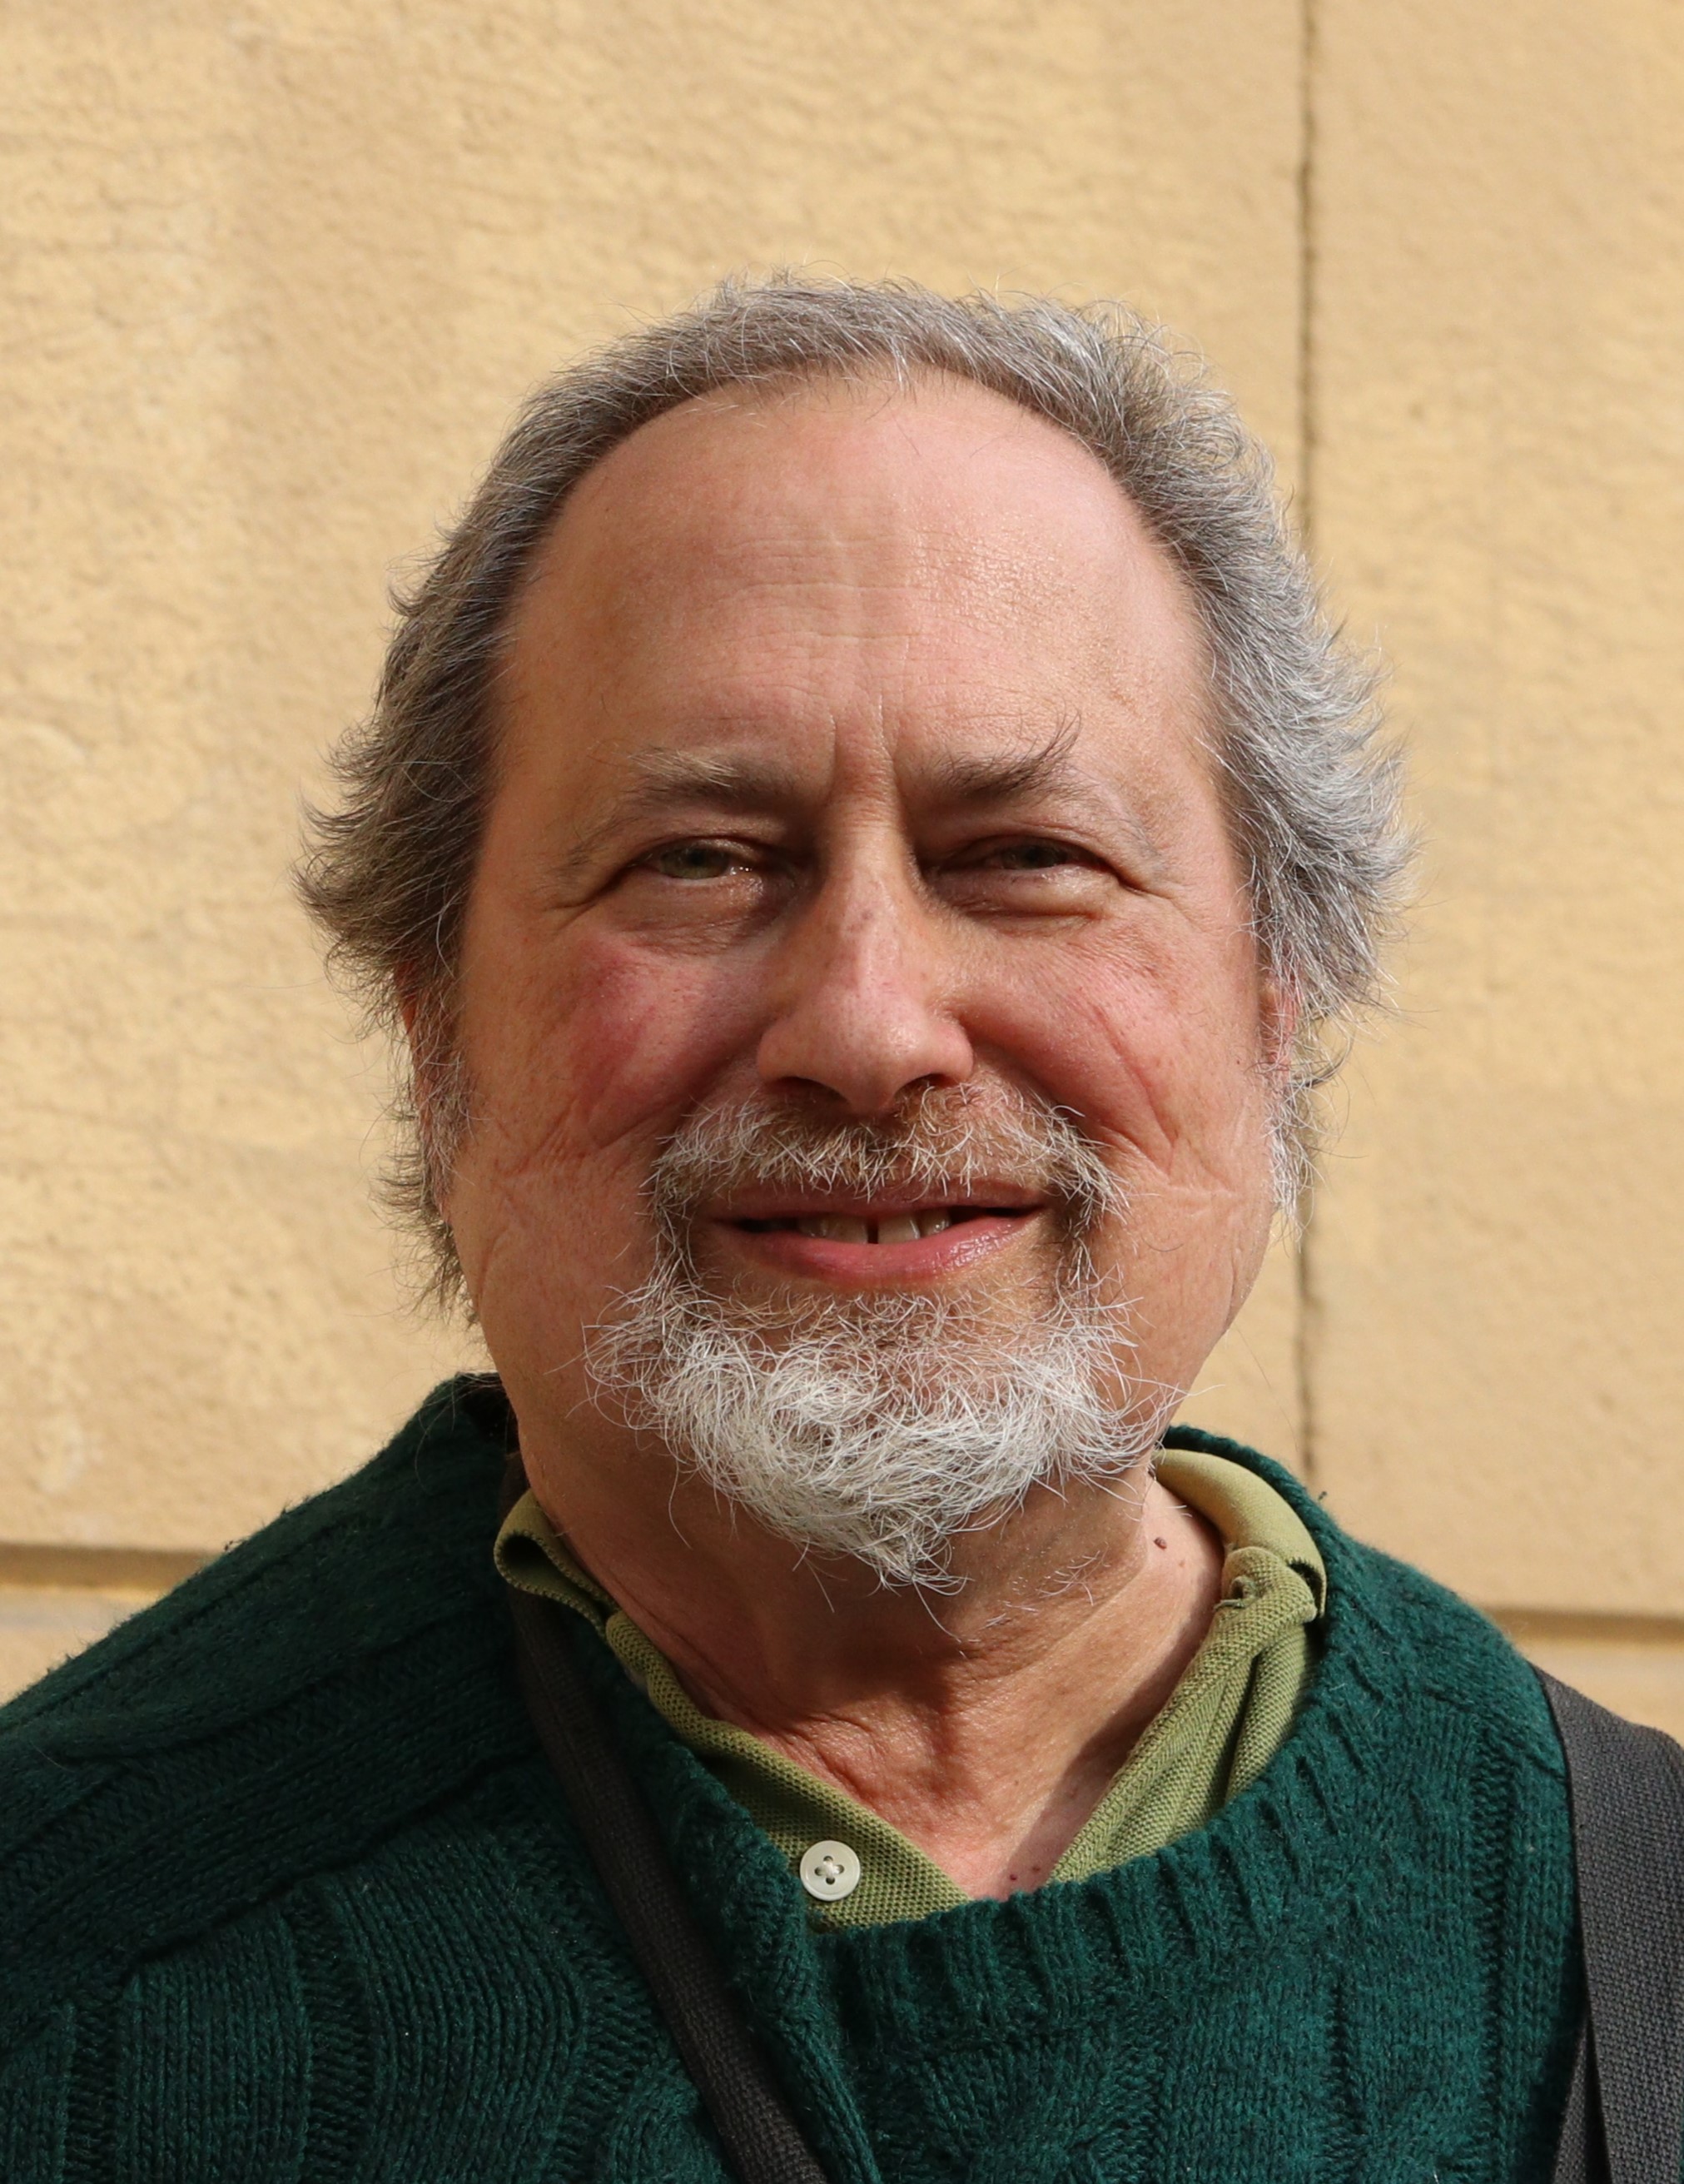 Richard Stallman at the University of Bologna, Italy, after his conference Software libre and freedom in the digital society and taking off his mask.